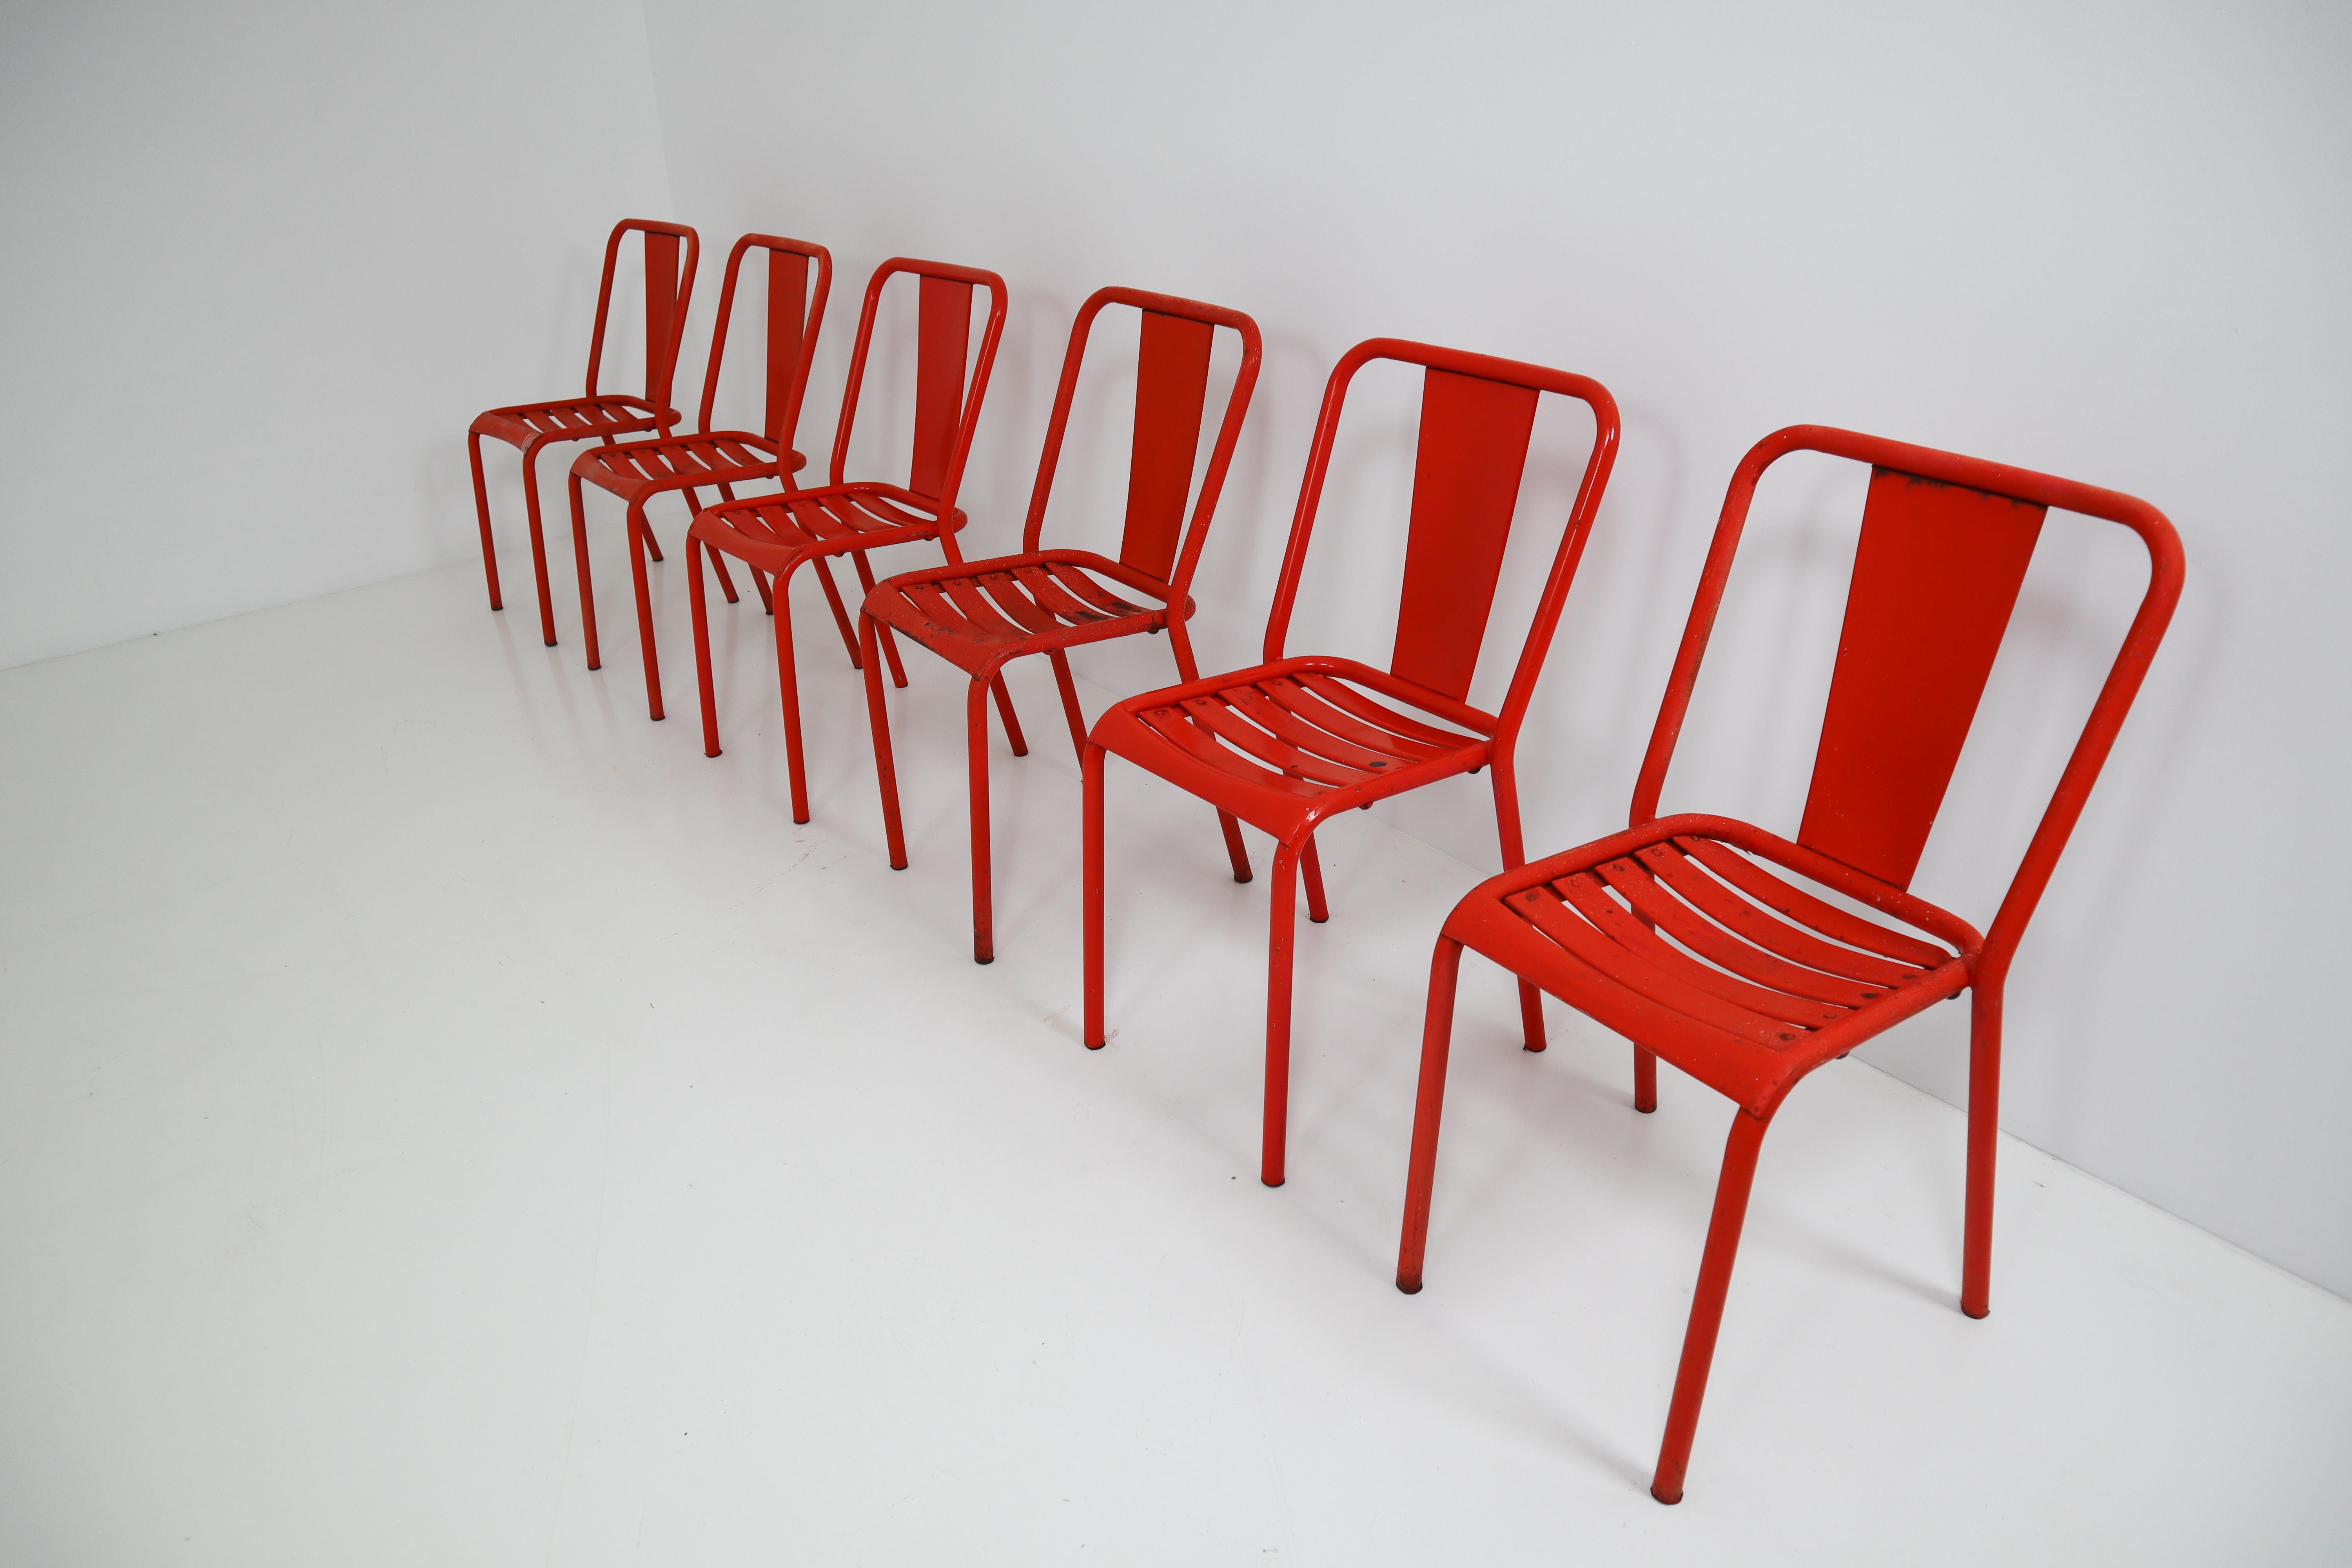 Tolix T4 metal chairs by designer Xavier Pauchard, in Red color. Pretty patina. Probably from 1950, without certainty. Ideal for midcentury, industrial decoration. Measures: Seat height 45cm. 

The French company Tolix was founded after World War